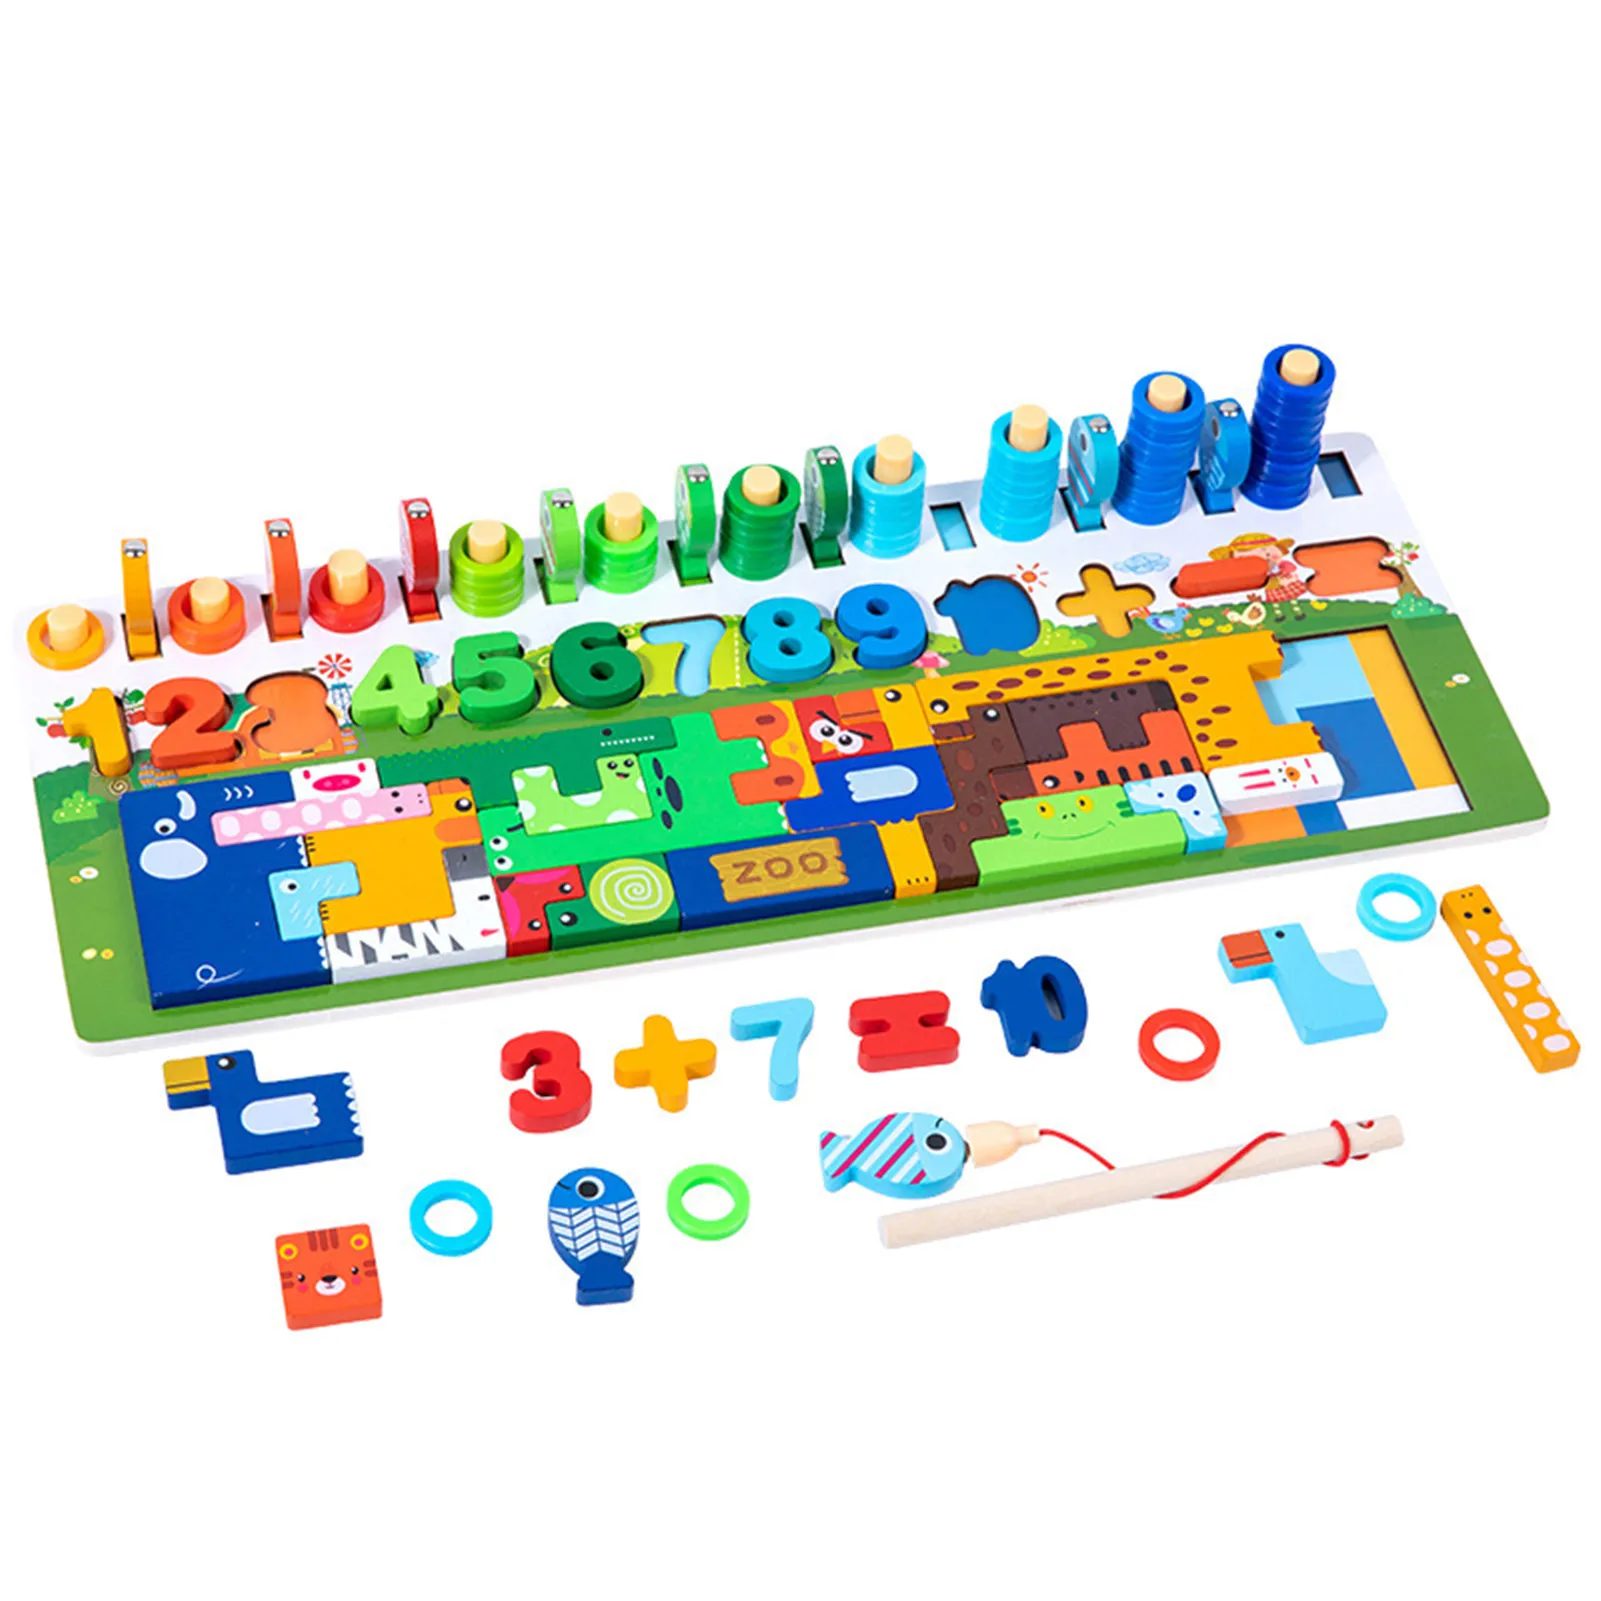 

Wooden Number Puzzles Montessori Toys For Toddlers Sorting Counting Game For Toddler Activities Preschool Math Learning Toys For